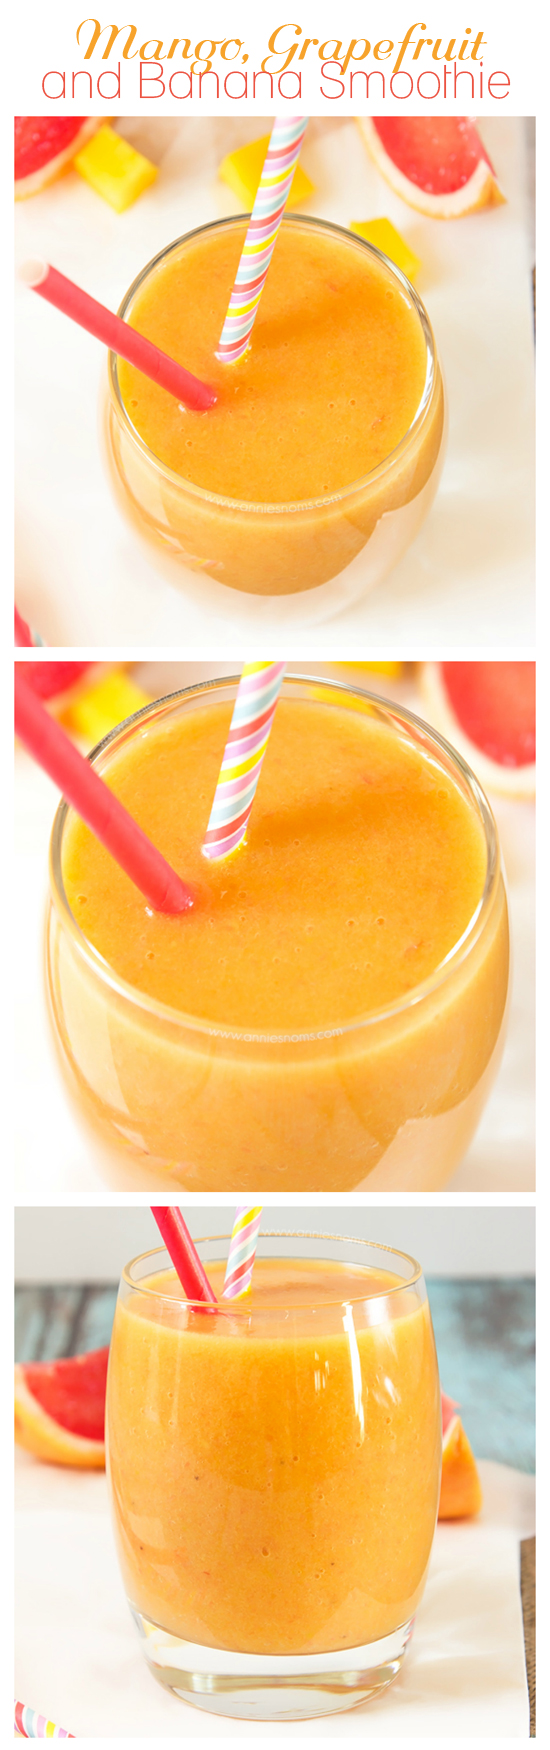 This Mango, Grapefruit and Banana Smoothie marries the strong, tart flavours of grapefruit with the soft, creamy taste of banana and tropical, sweet mango. Filling, fruity and just perfect to inject some sunshine into your day!